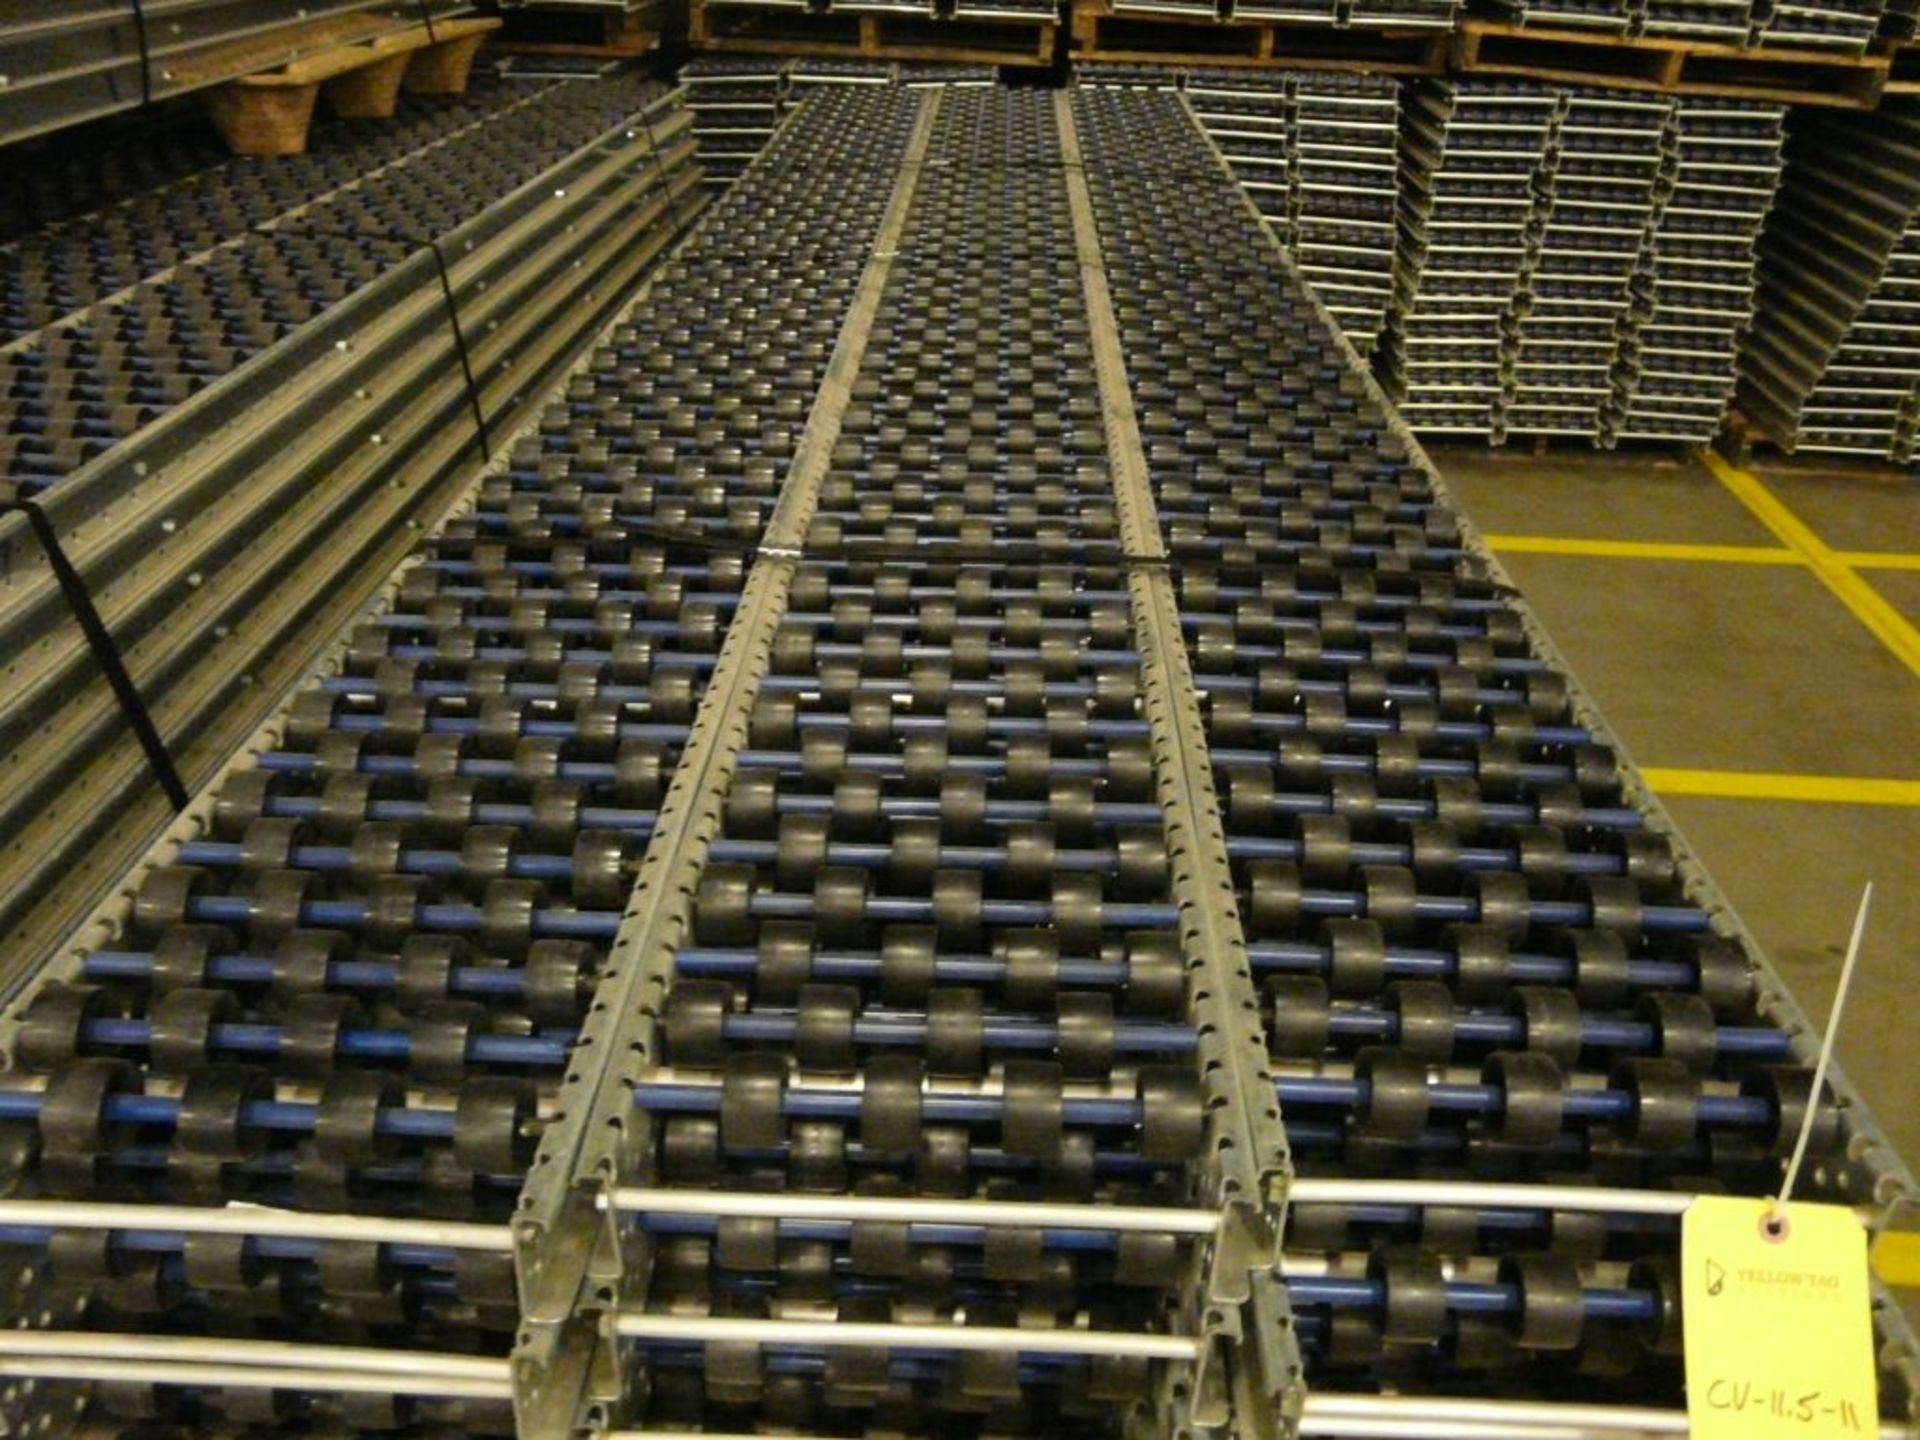 Lot of (90) SpanTrack Wheelbed Carton Flow Conveyors - 11.5'L x 11"W; Tag: 223603 - $30 Lot - Image 3 of 4